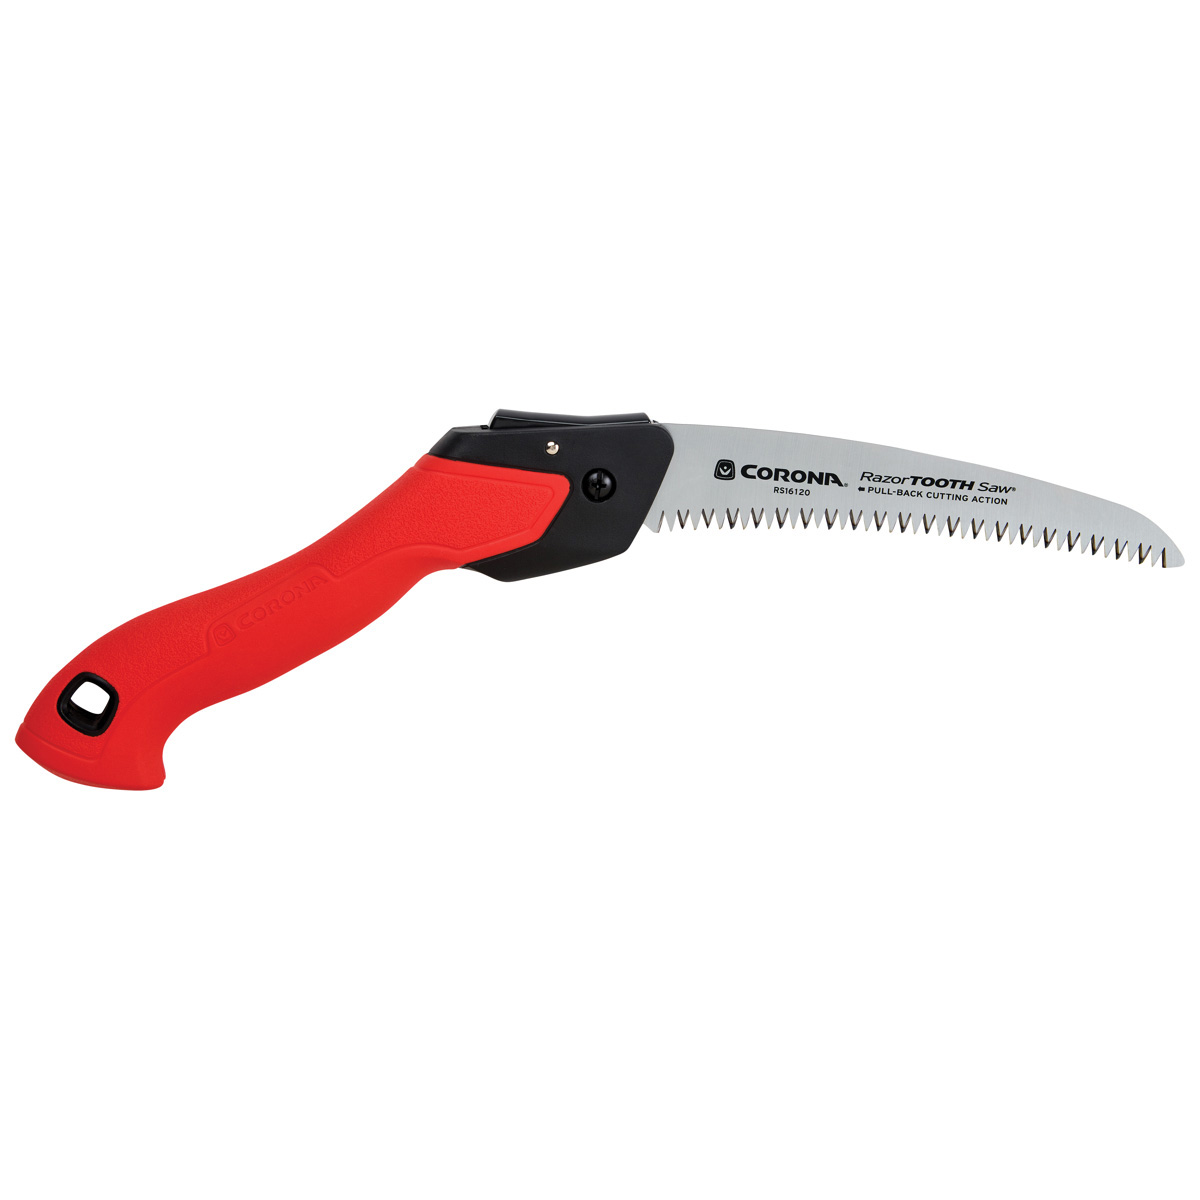 CORONA RS16120 Folding Pruning Saw, 7 in Blade, SK5 Steel Blade, 6 TPI, Plastic Handle, Non-Slip Handle